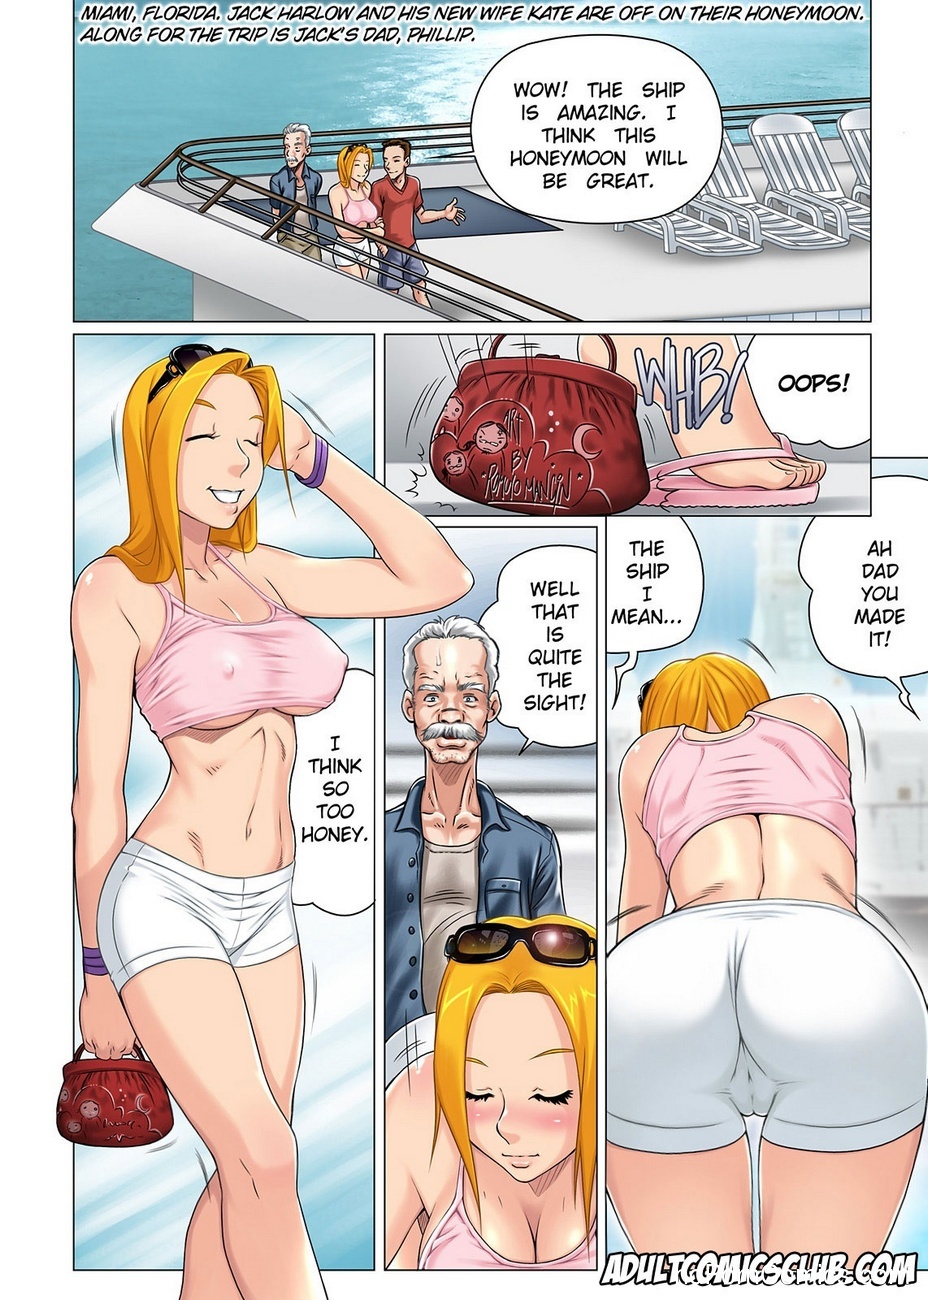 Another Horny Father In Law Sex Comic picture pic